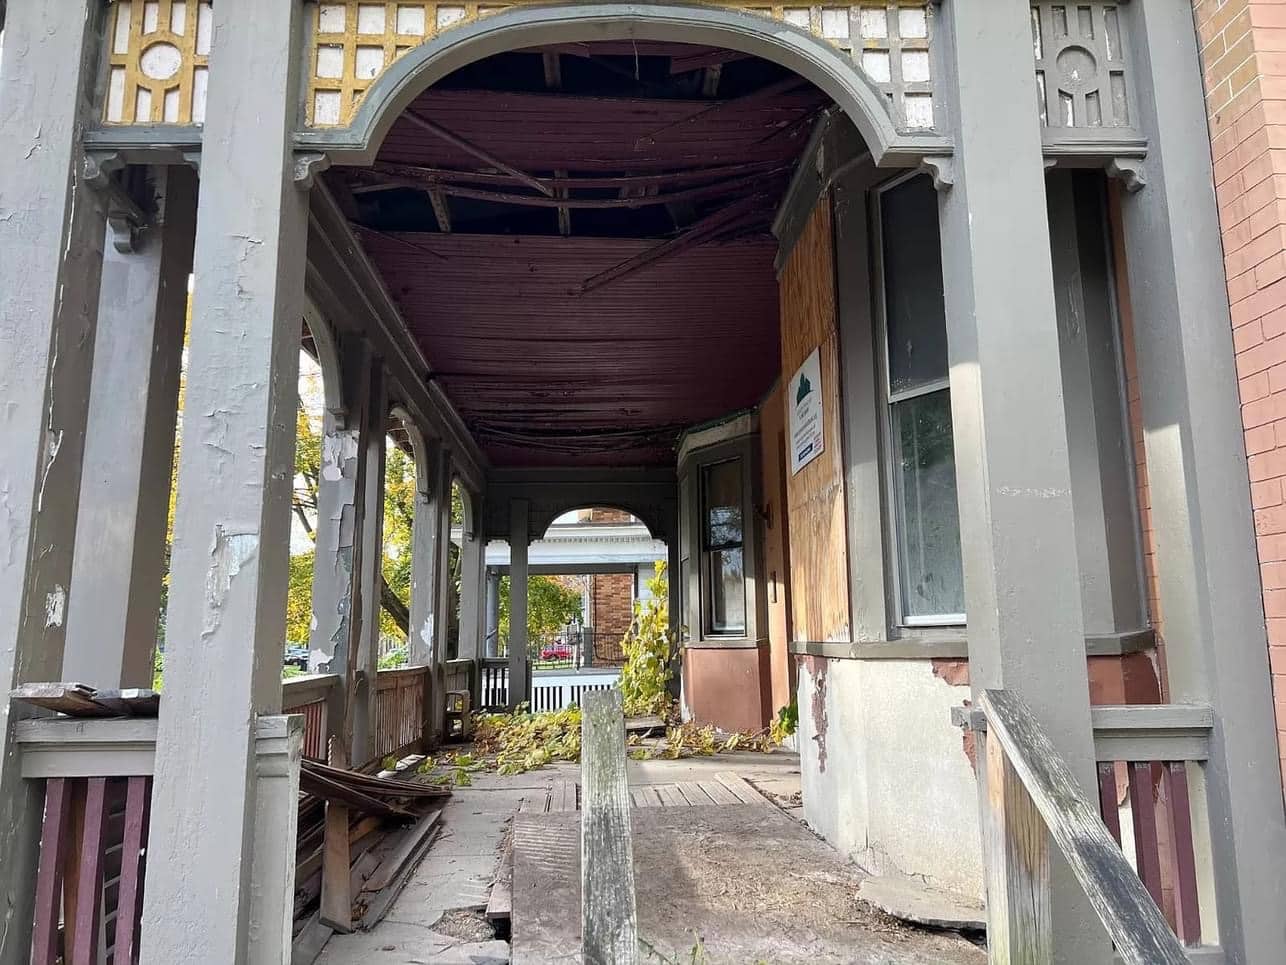 1910 Fixer Upper For Sale In Syracuse New York